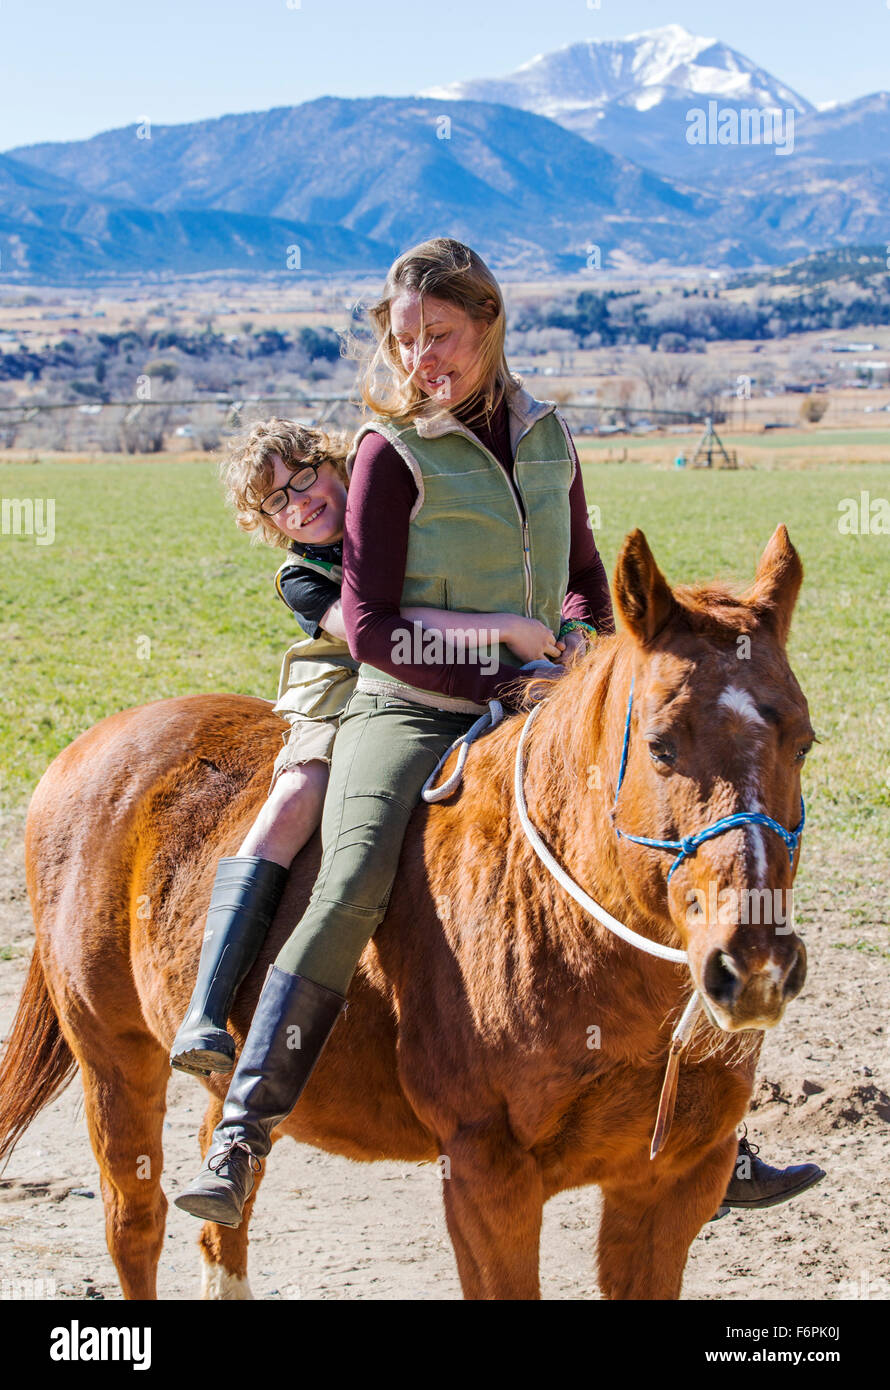 Attractive mother and young son riding horse in ranch pasture Stock Photo